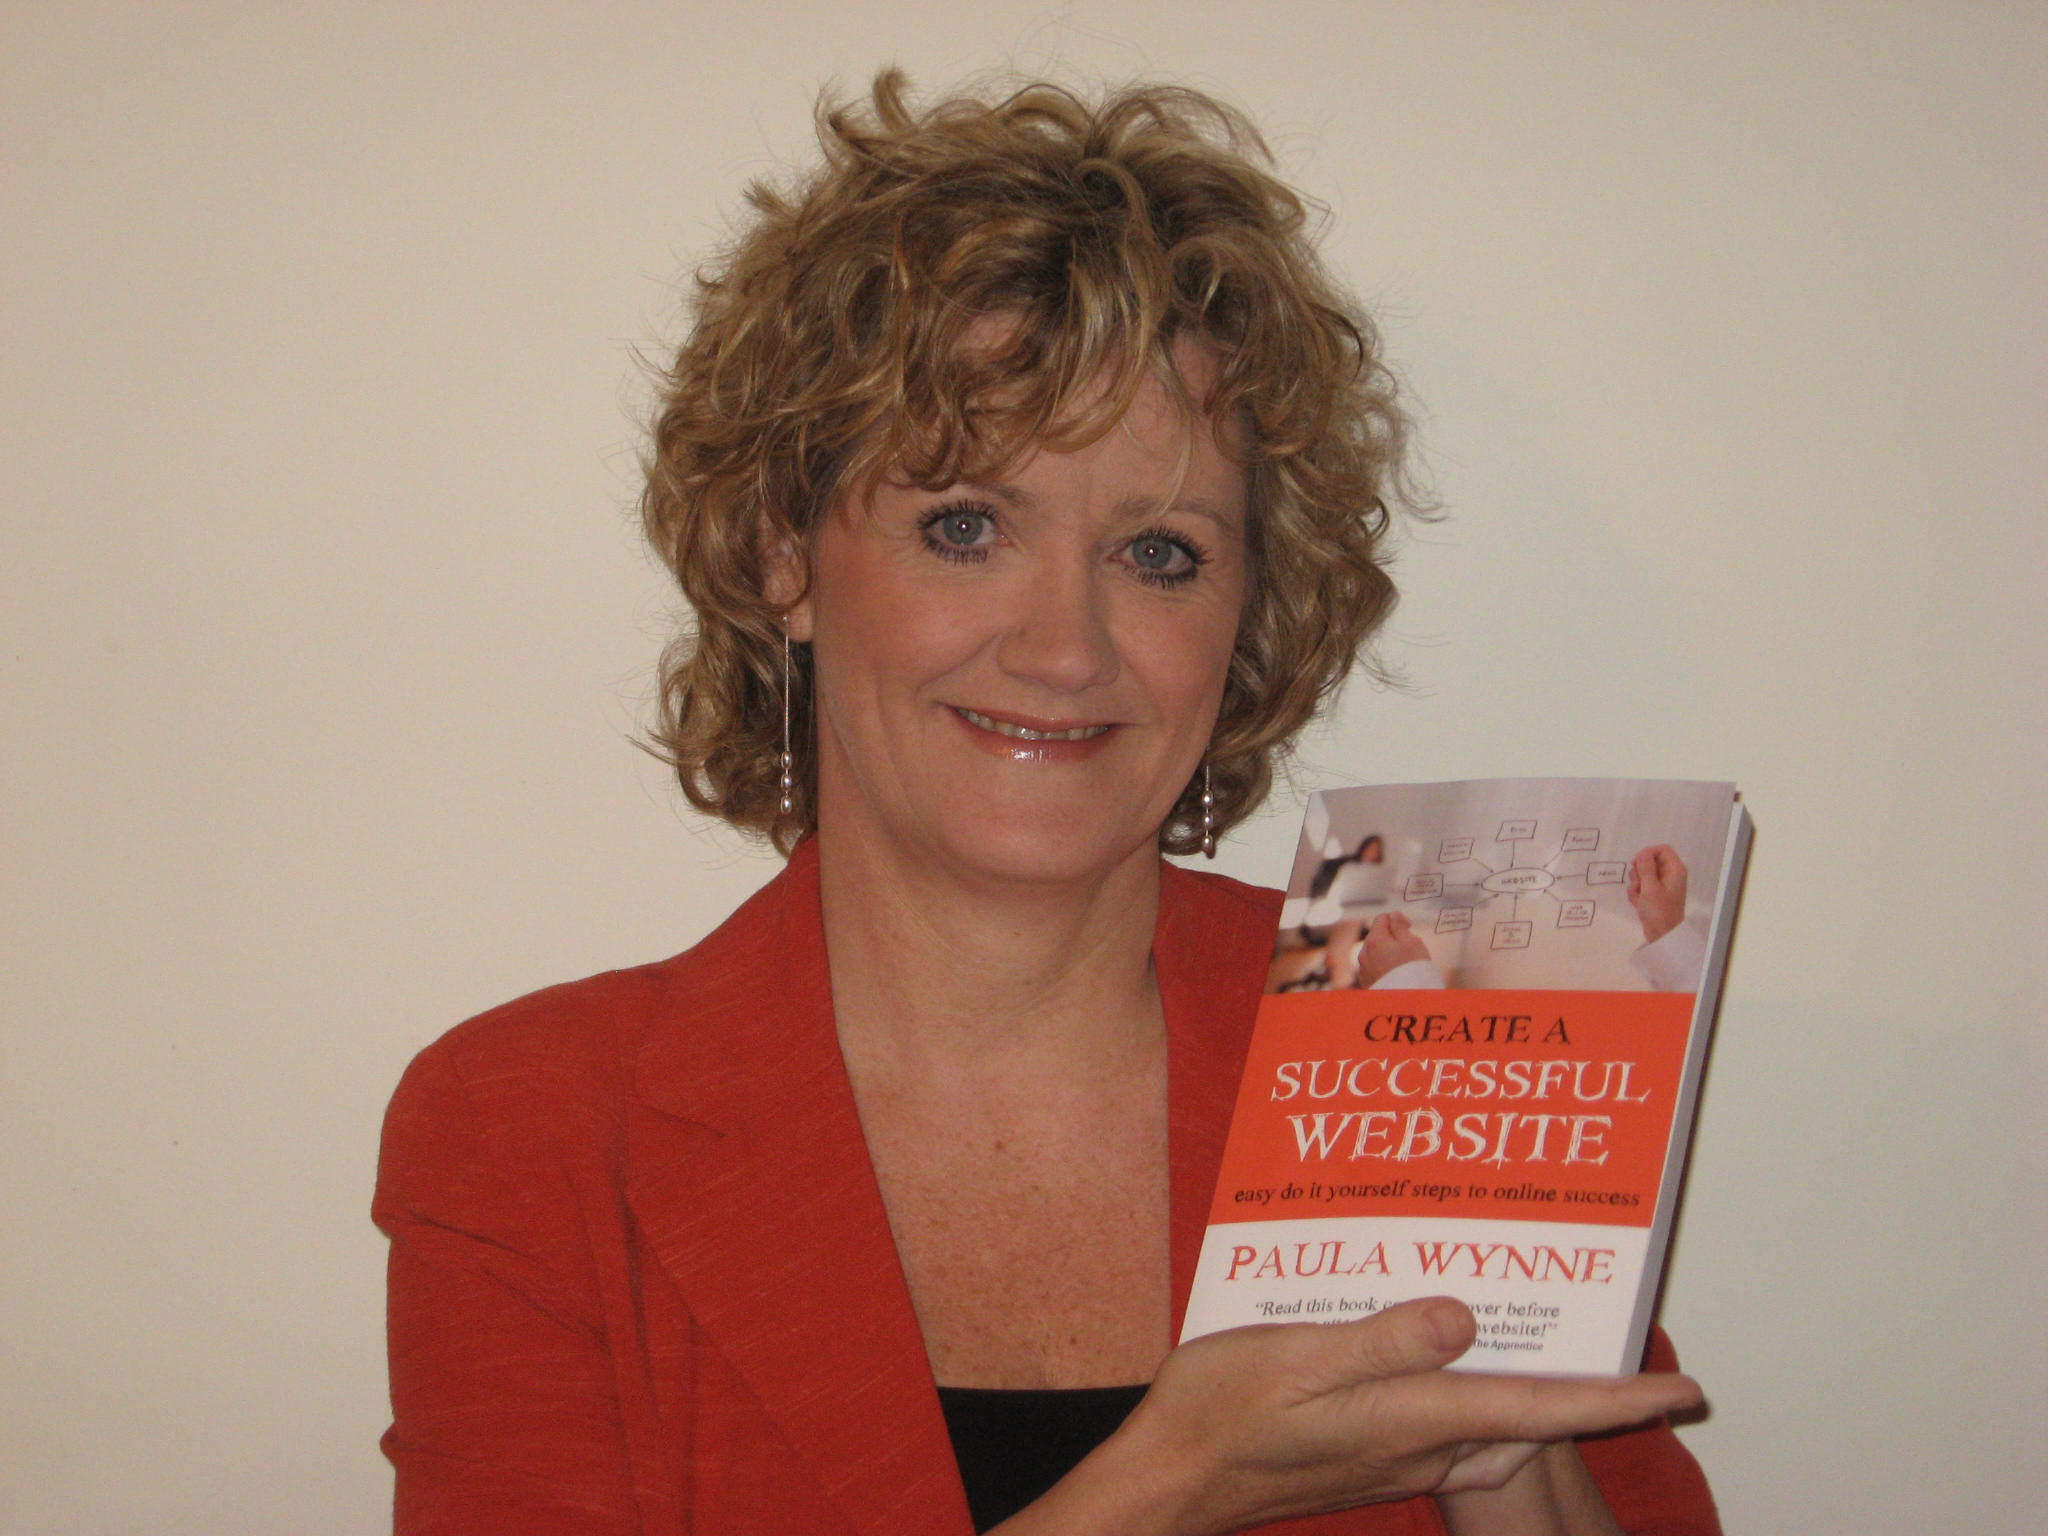 Paula Wynne's first published non-fiction book